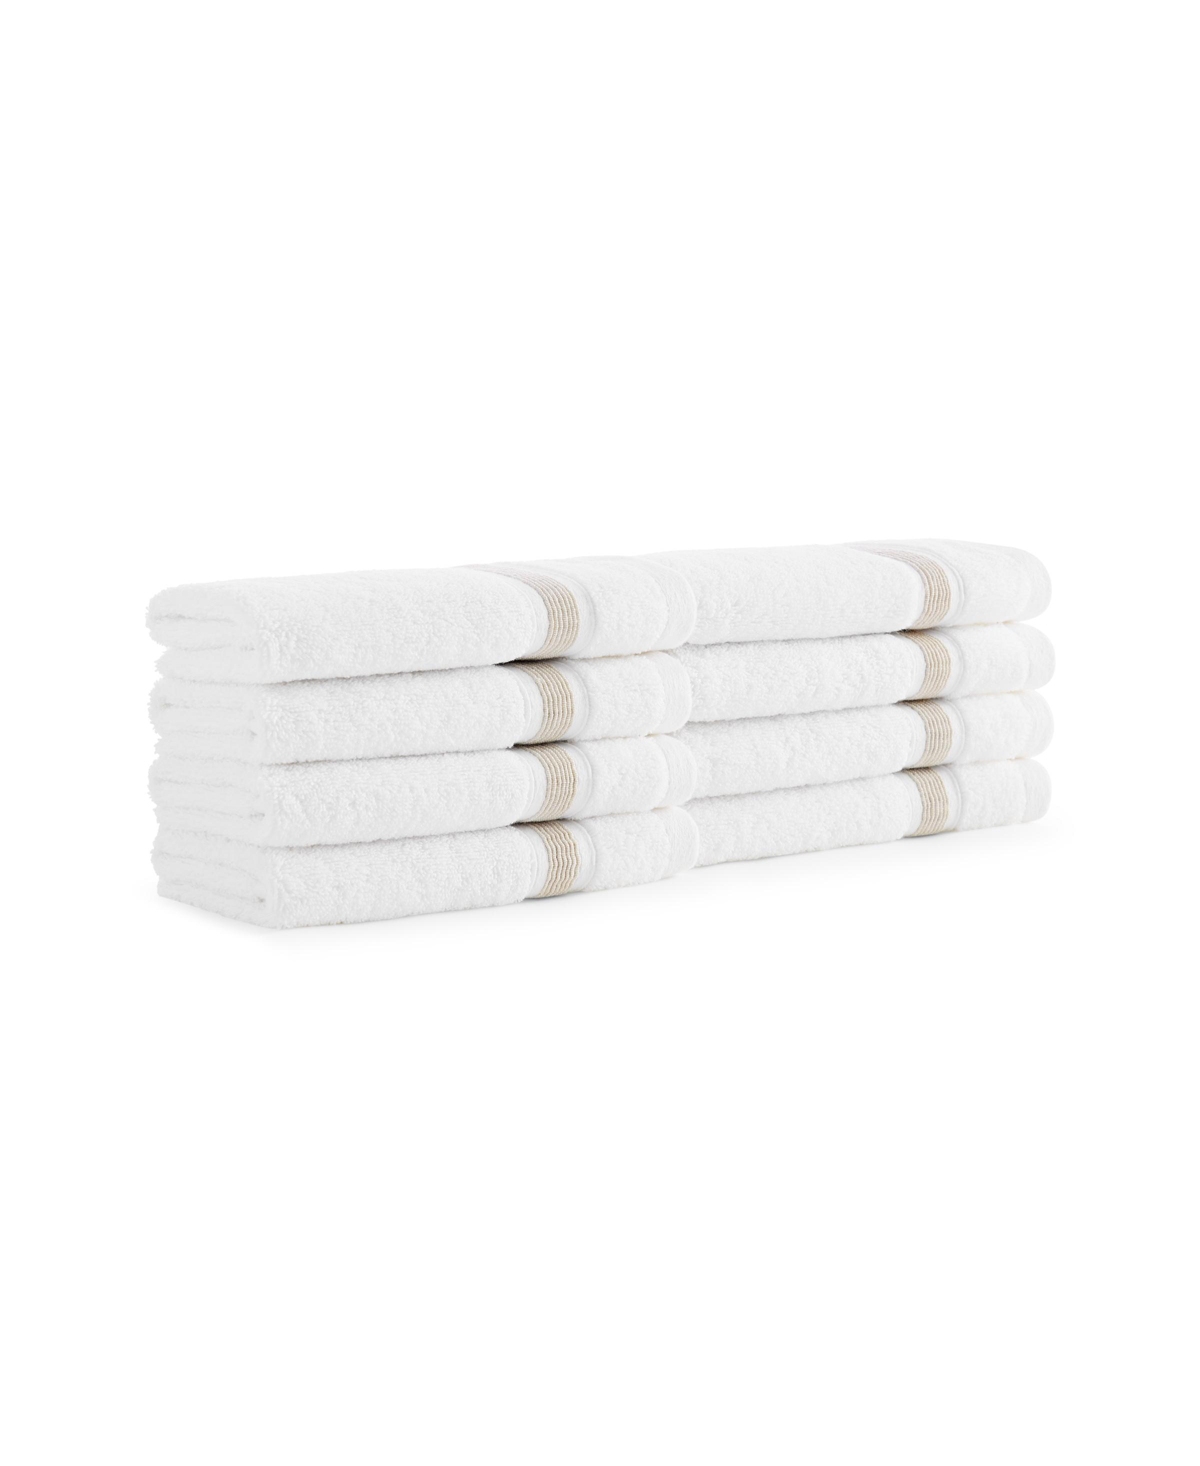 Aston And Arden Aegean Eco-friendly Recycled Turkish Washcloths (8 Pack), 13x13, 600 Gsm, White With Weft Woven Stri In Beige